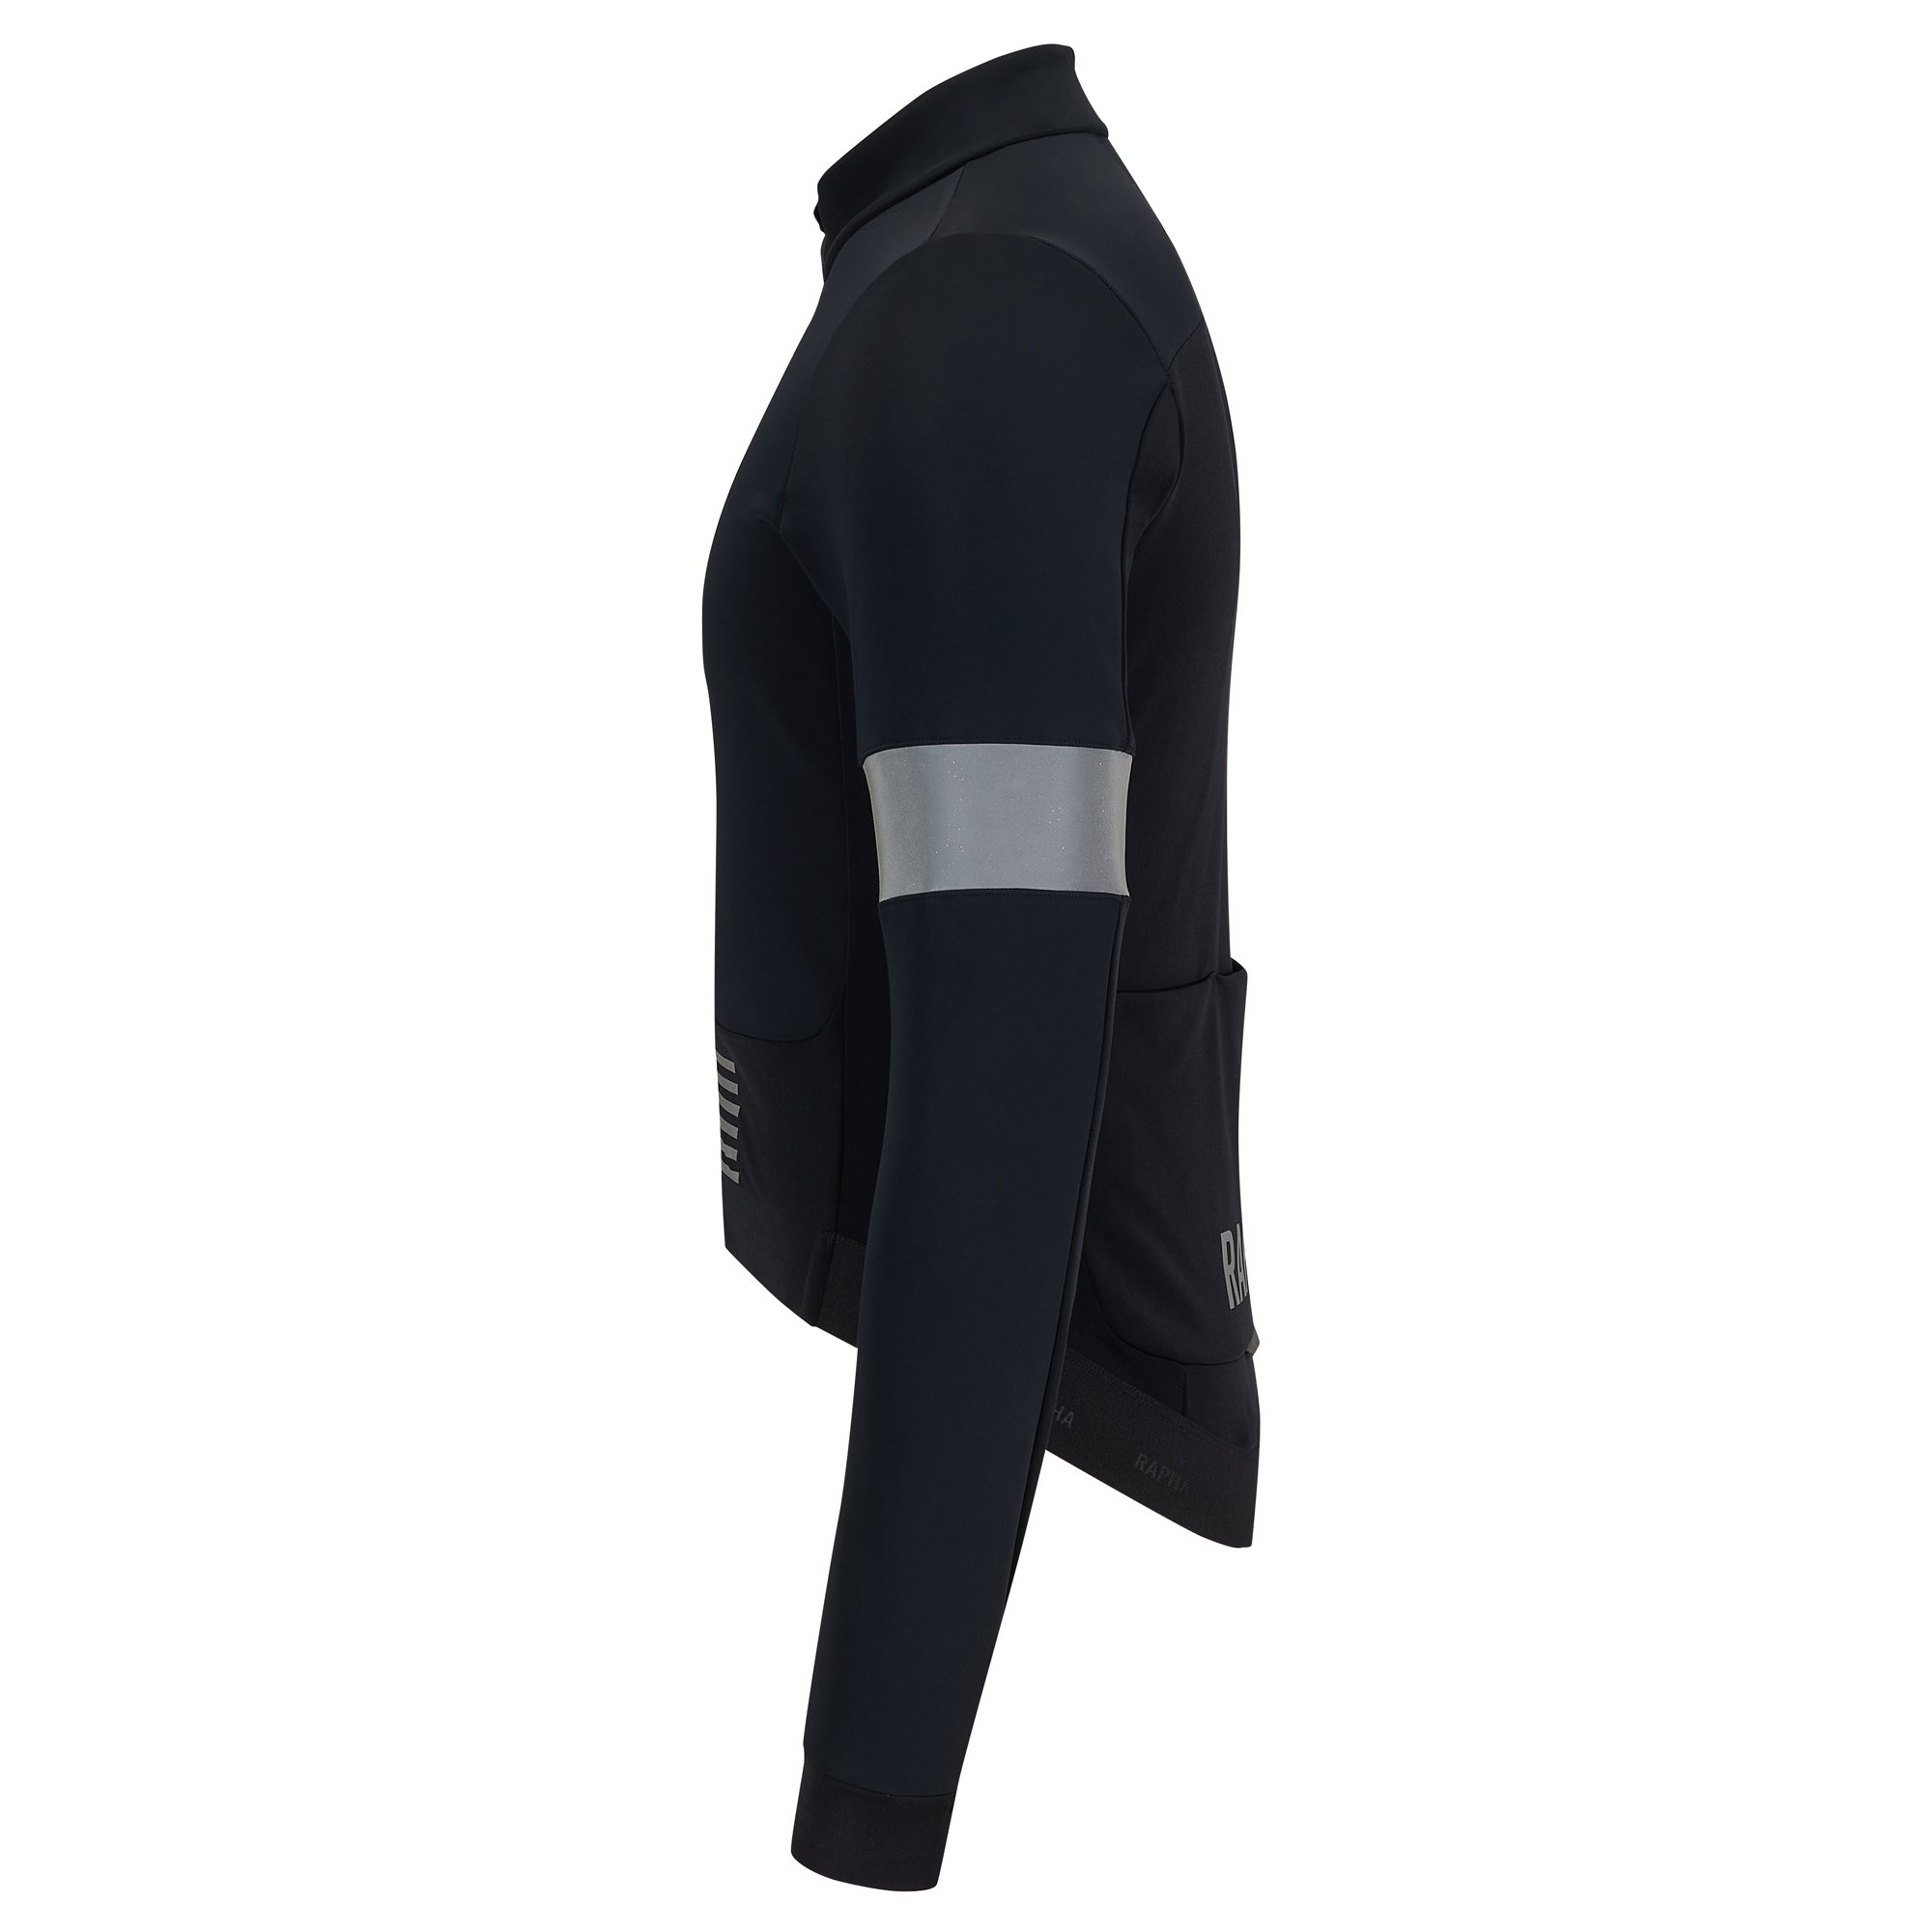 Men's Pro Team Winter Cycling Jacket for Cold Rides | Rapha